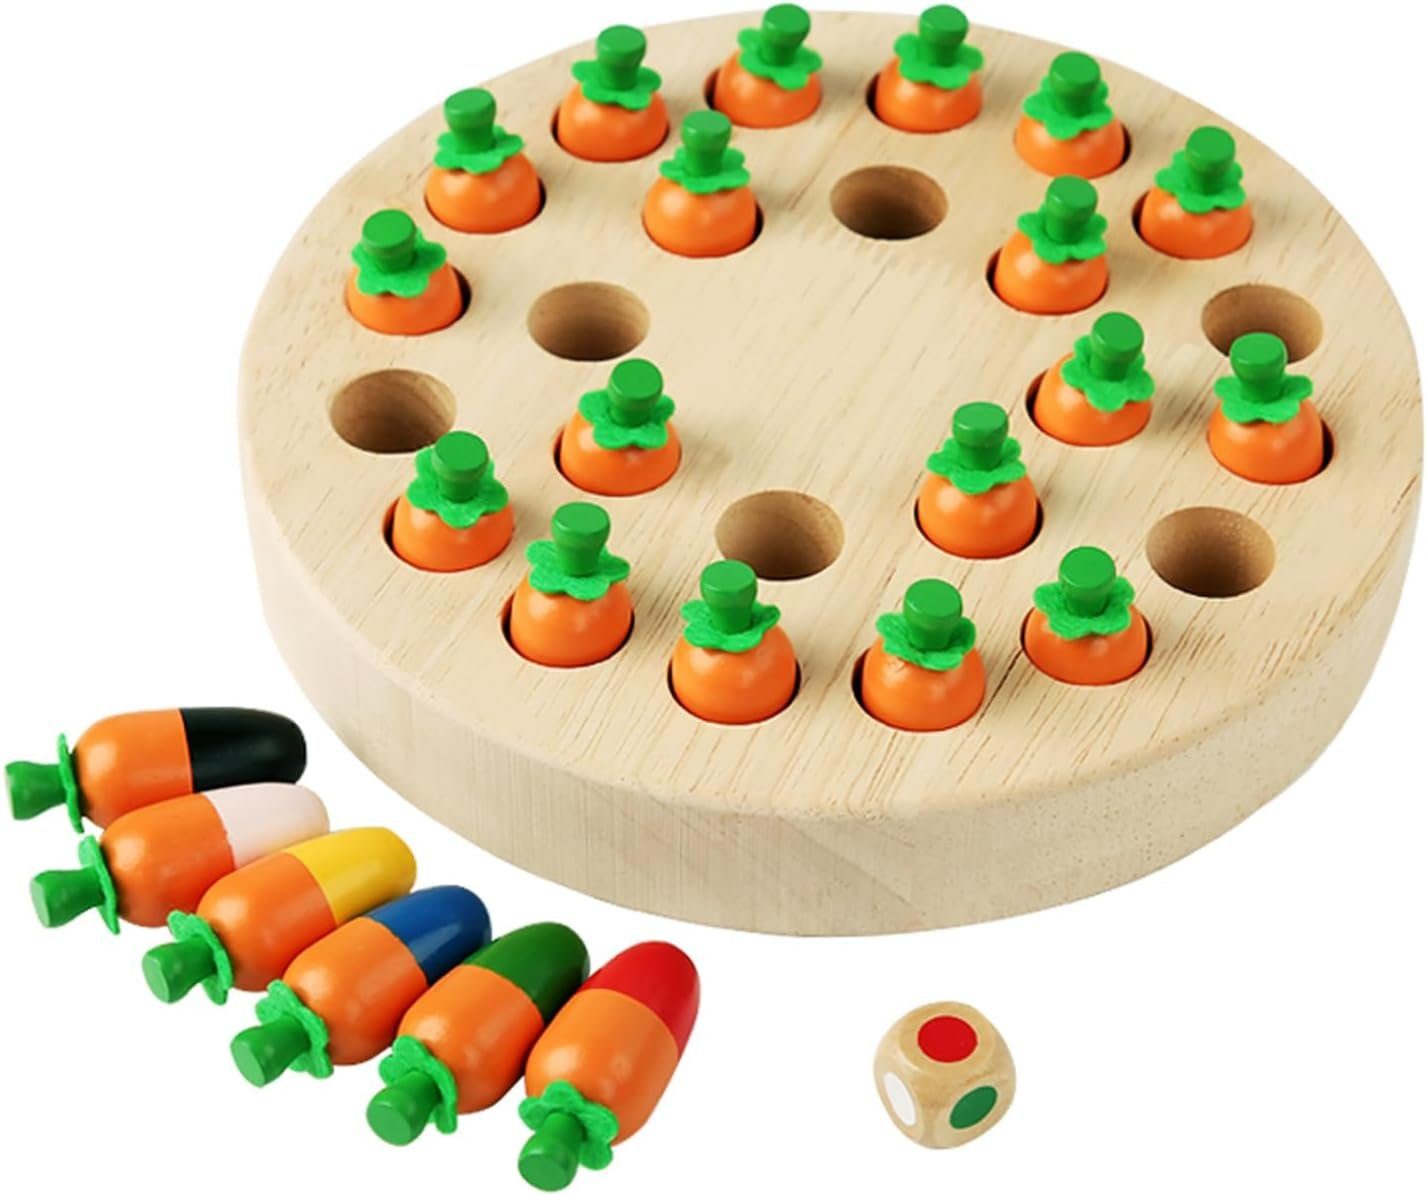 SOTOR Spielbausteine, (Montessori Mushroom/Carrot Harvest Game Wooden Memory Games Color Sorting Matching Educational Toys Family Board Games for Toddlers 3 4 5 6 Years Old Boys Girls Preschool Game)